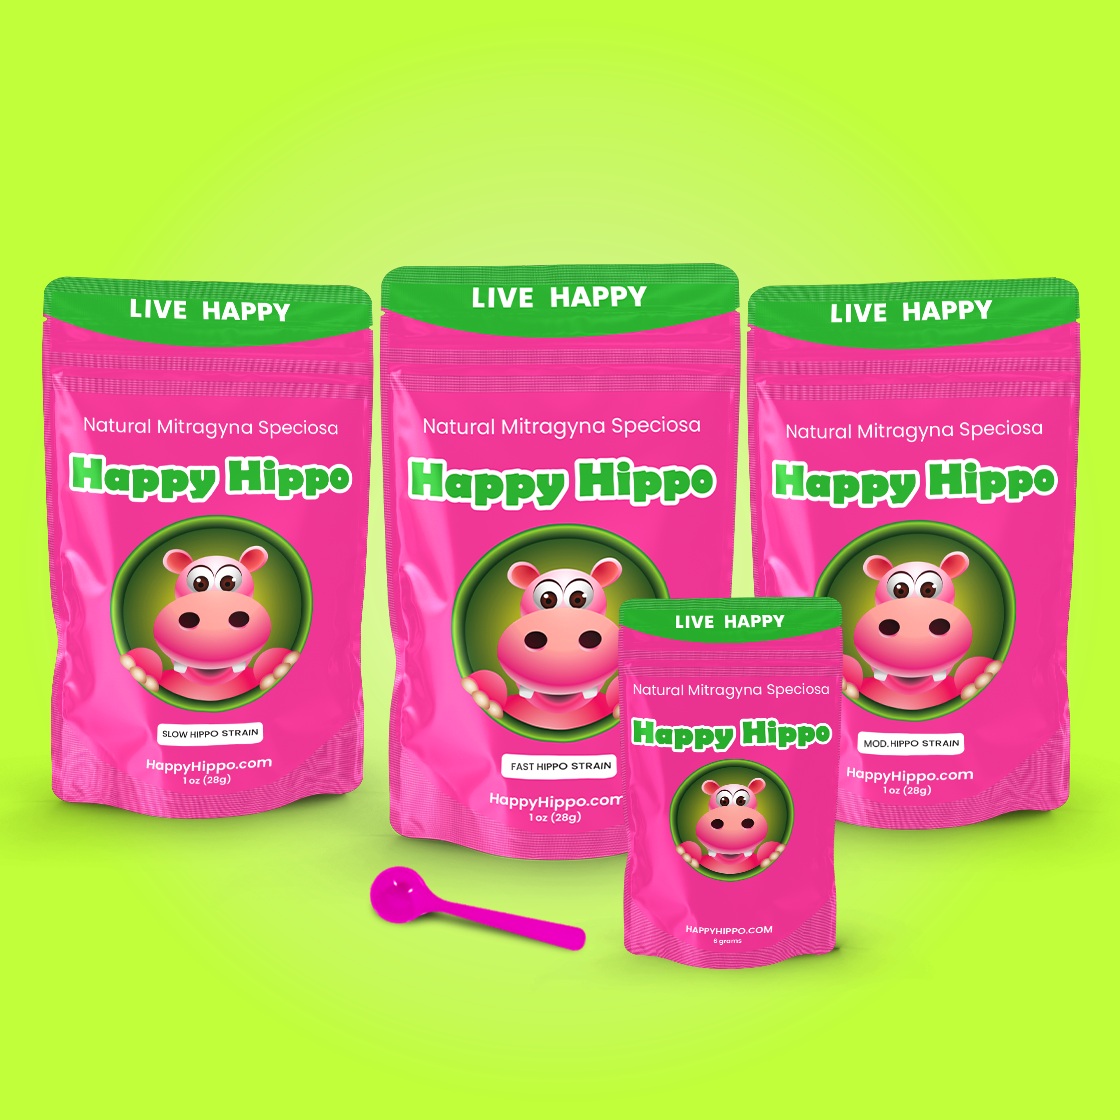 Product image of three 1-ounce resealable packets of Happy Hippo Kratom Powders, as well as a 1-gram little pink measuring scoop, and a 5-gram sample packet of Happy Hippo Kratom Powder